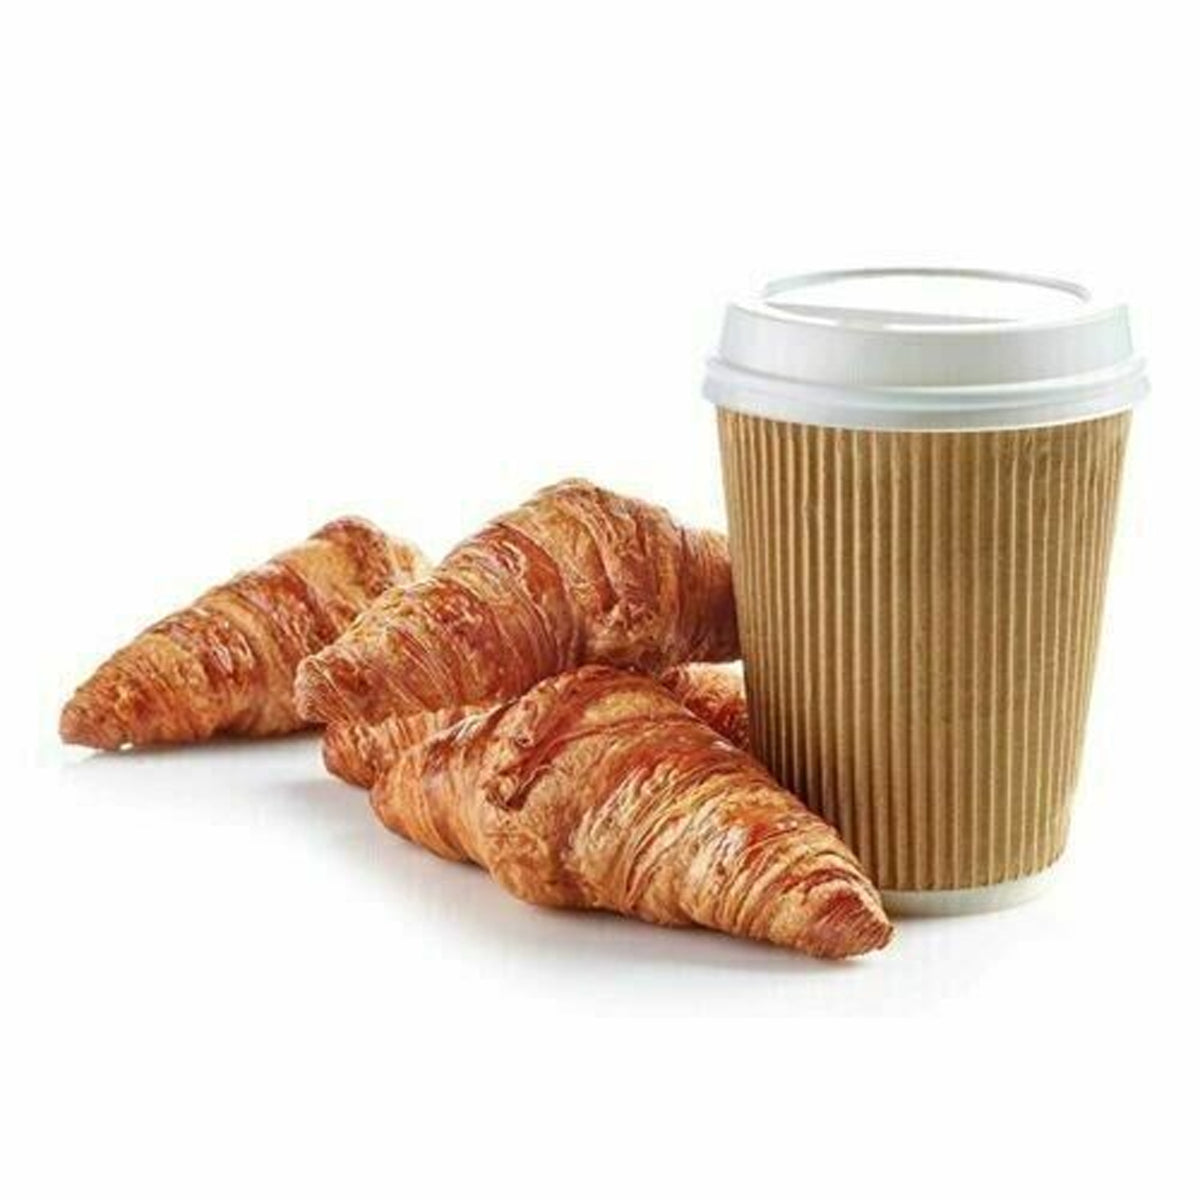 Disposable Cups With Lid 8 Oz - 100 Pcs